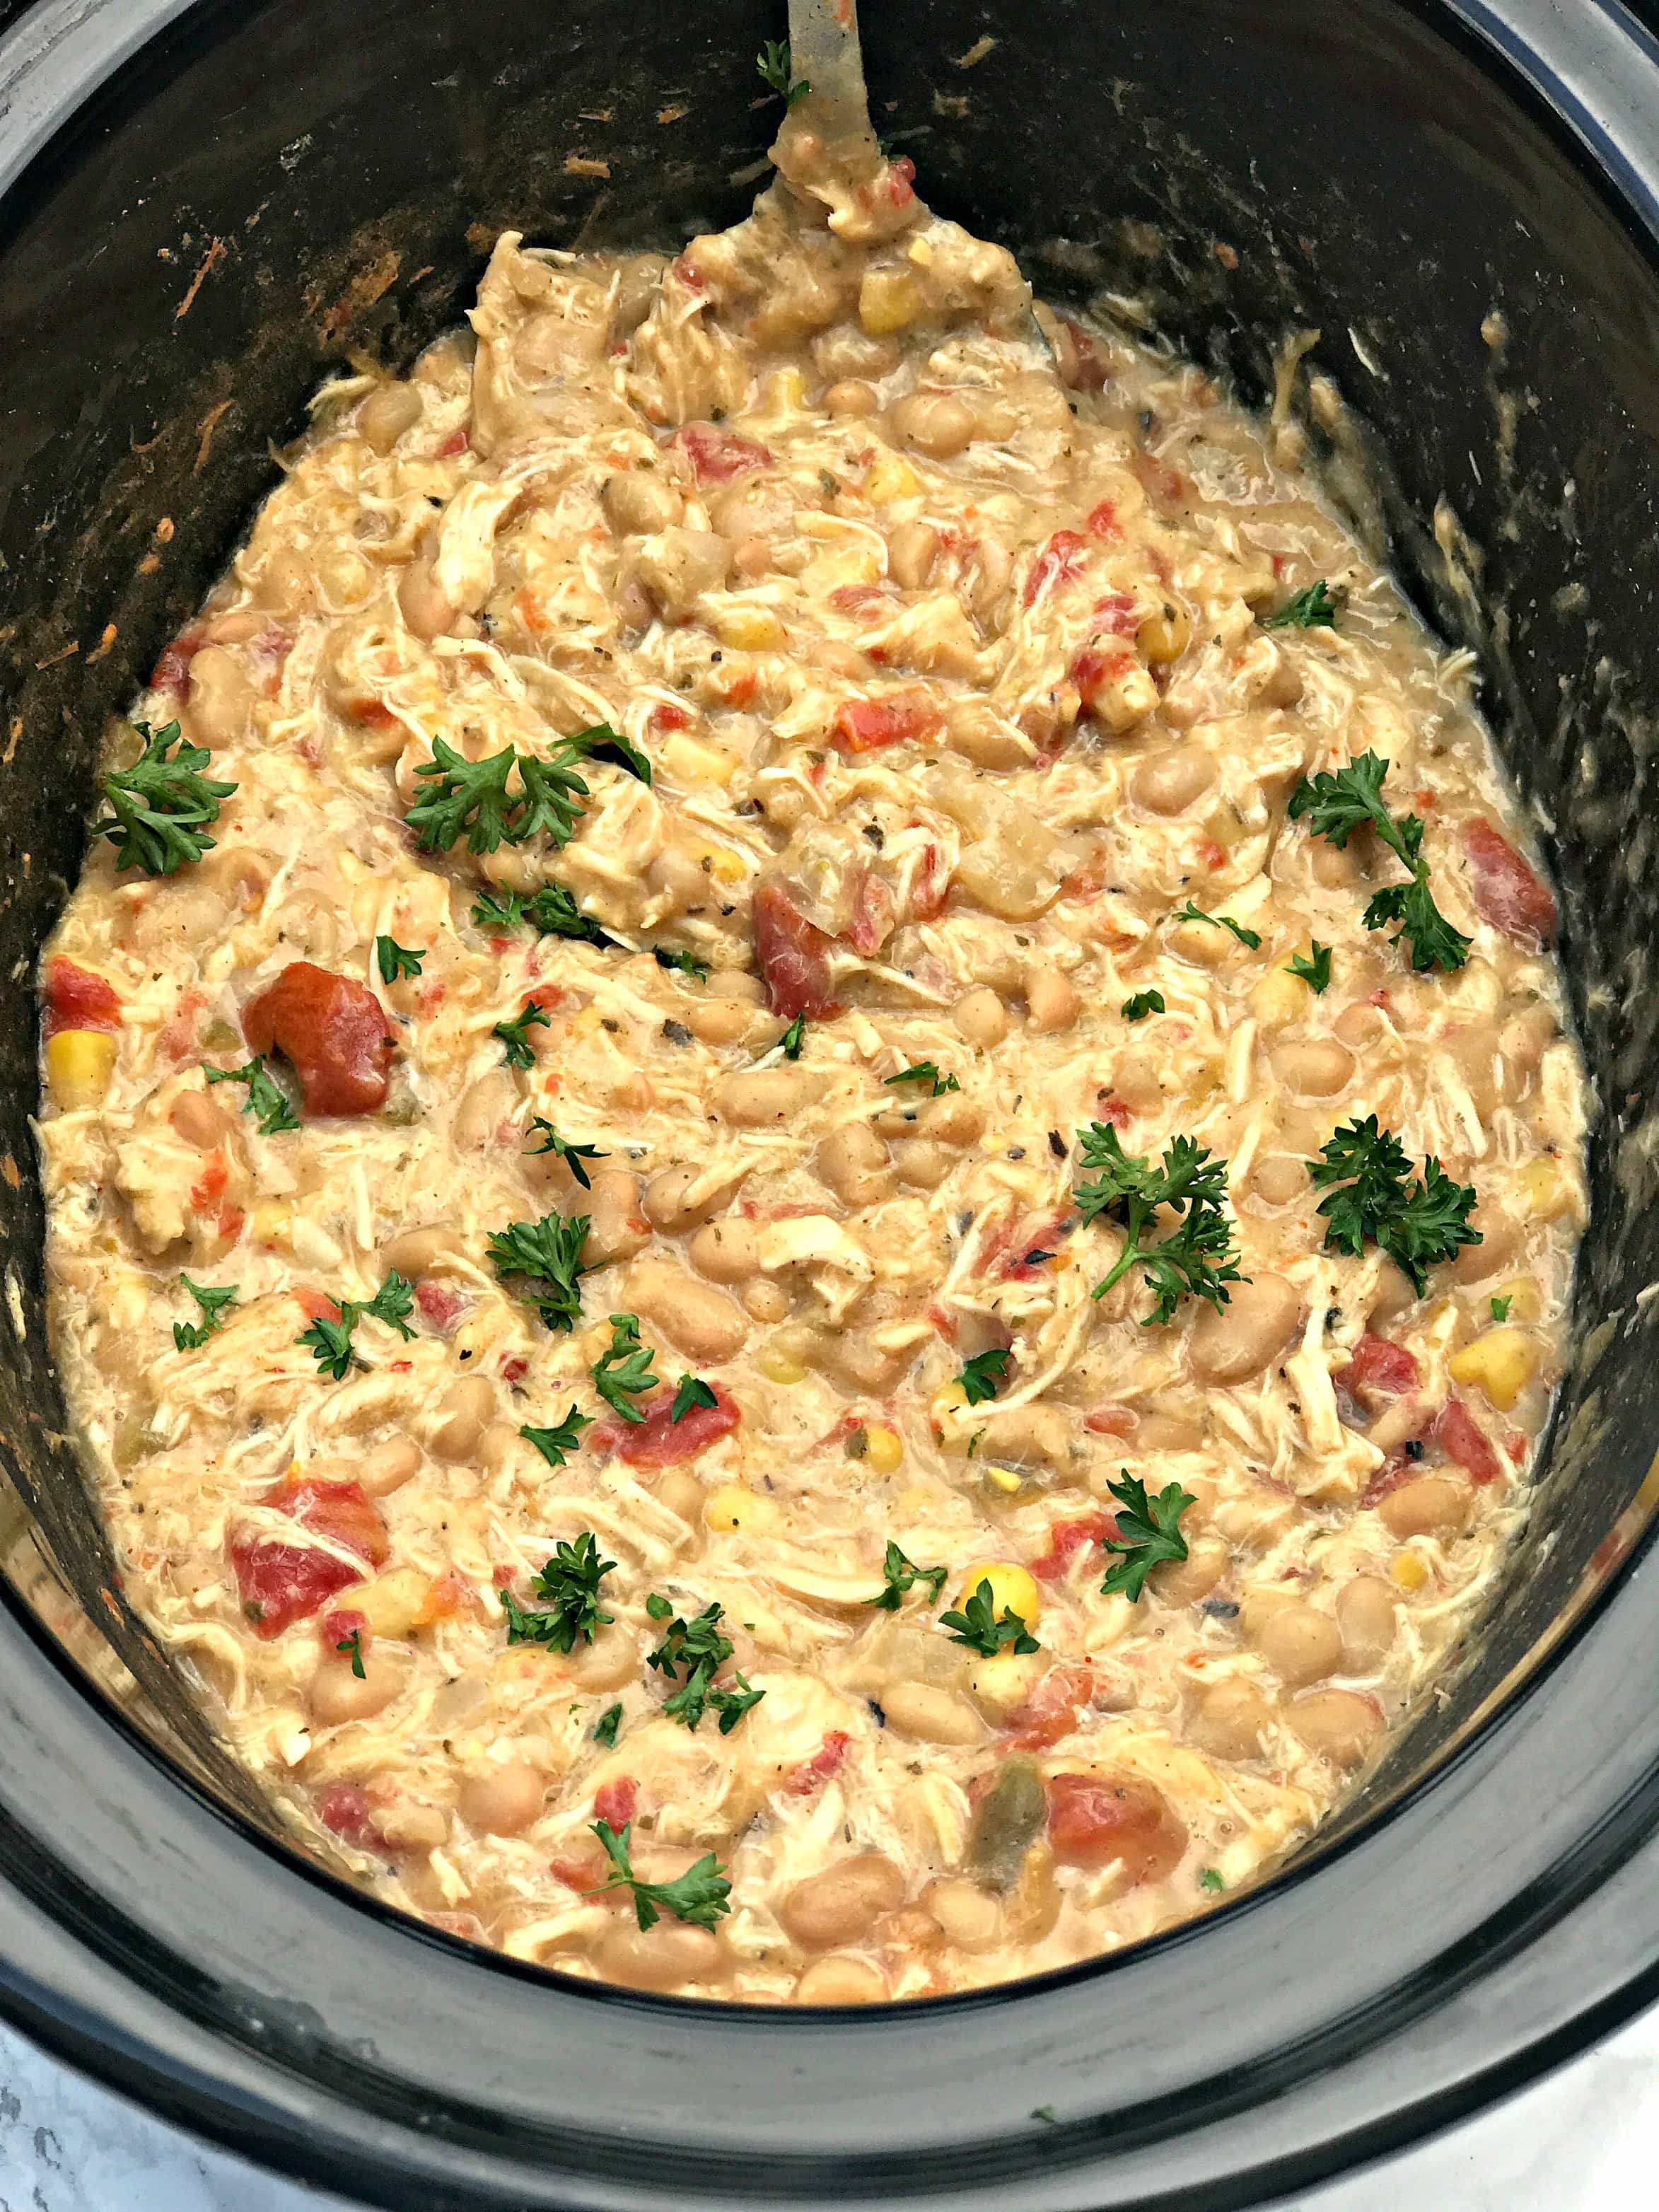 The Best Easy Slow Cooker Crockpot Creamy White Chicken Chili,Origami For Beginners Step By Step